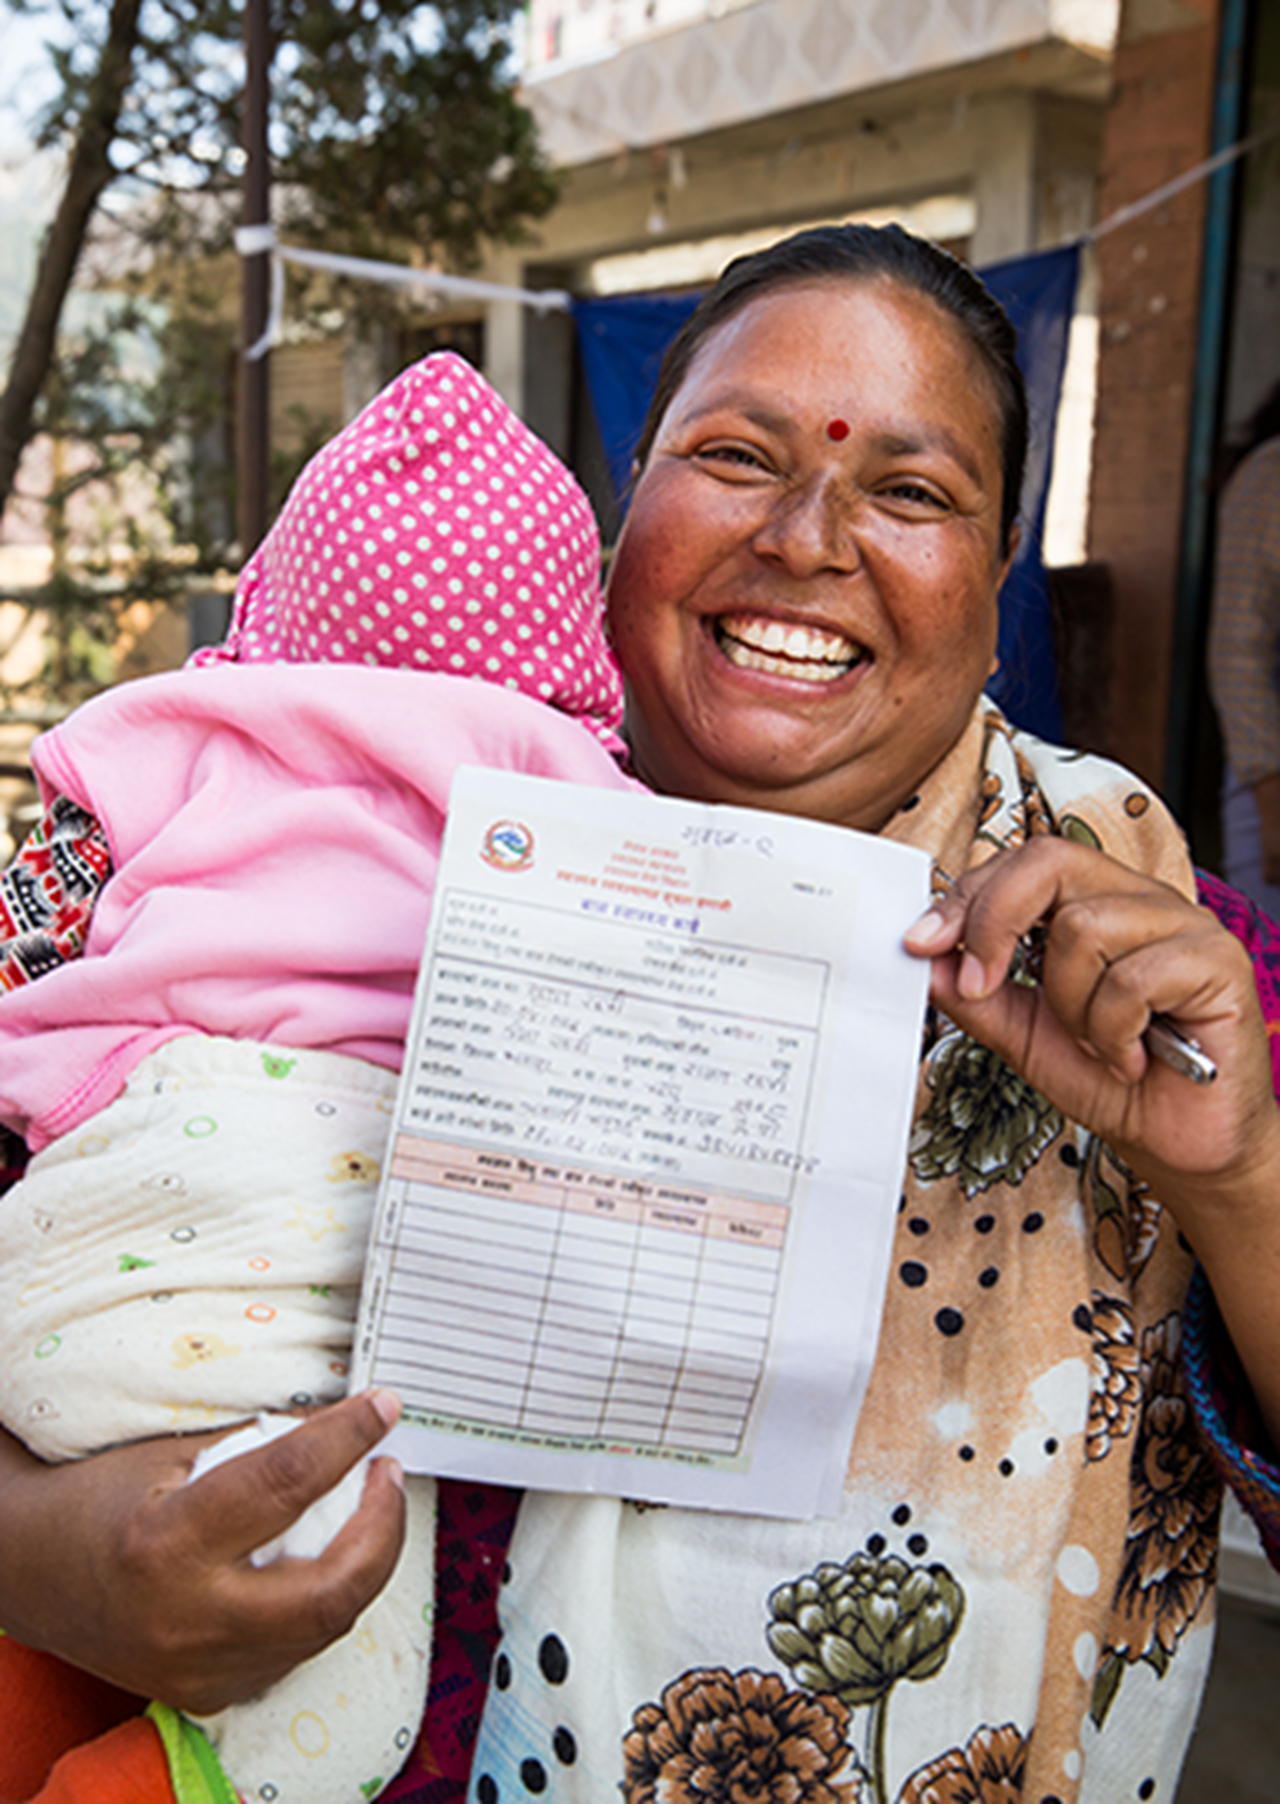 A mother displays her three-month-old's vaccination card outside of an outreach clinic in Bhaktapur, Nepal.